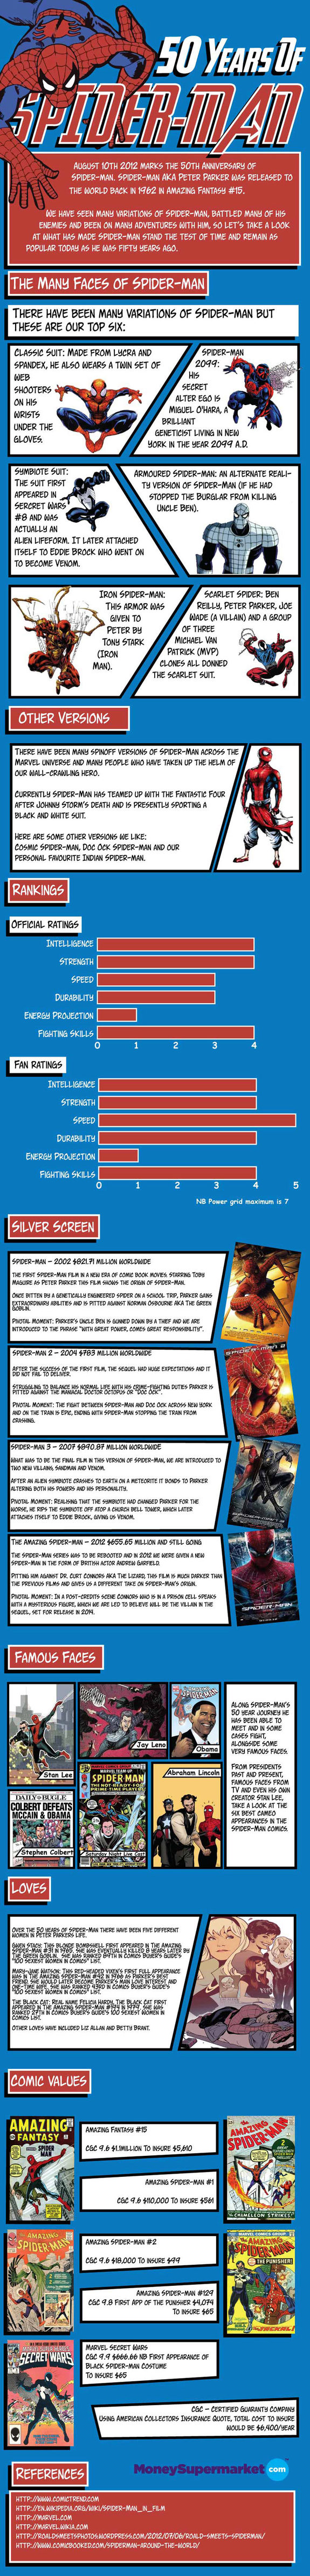 50 Years of Spider-Man Infographic